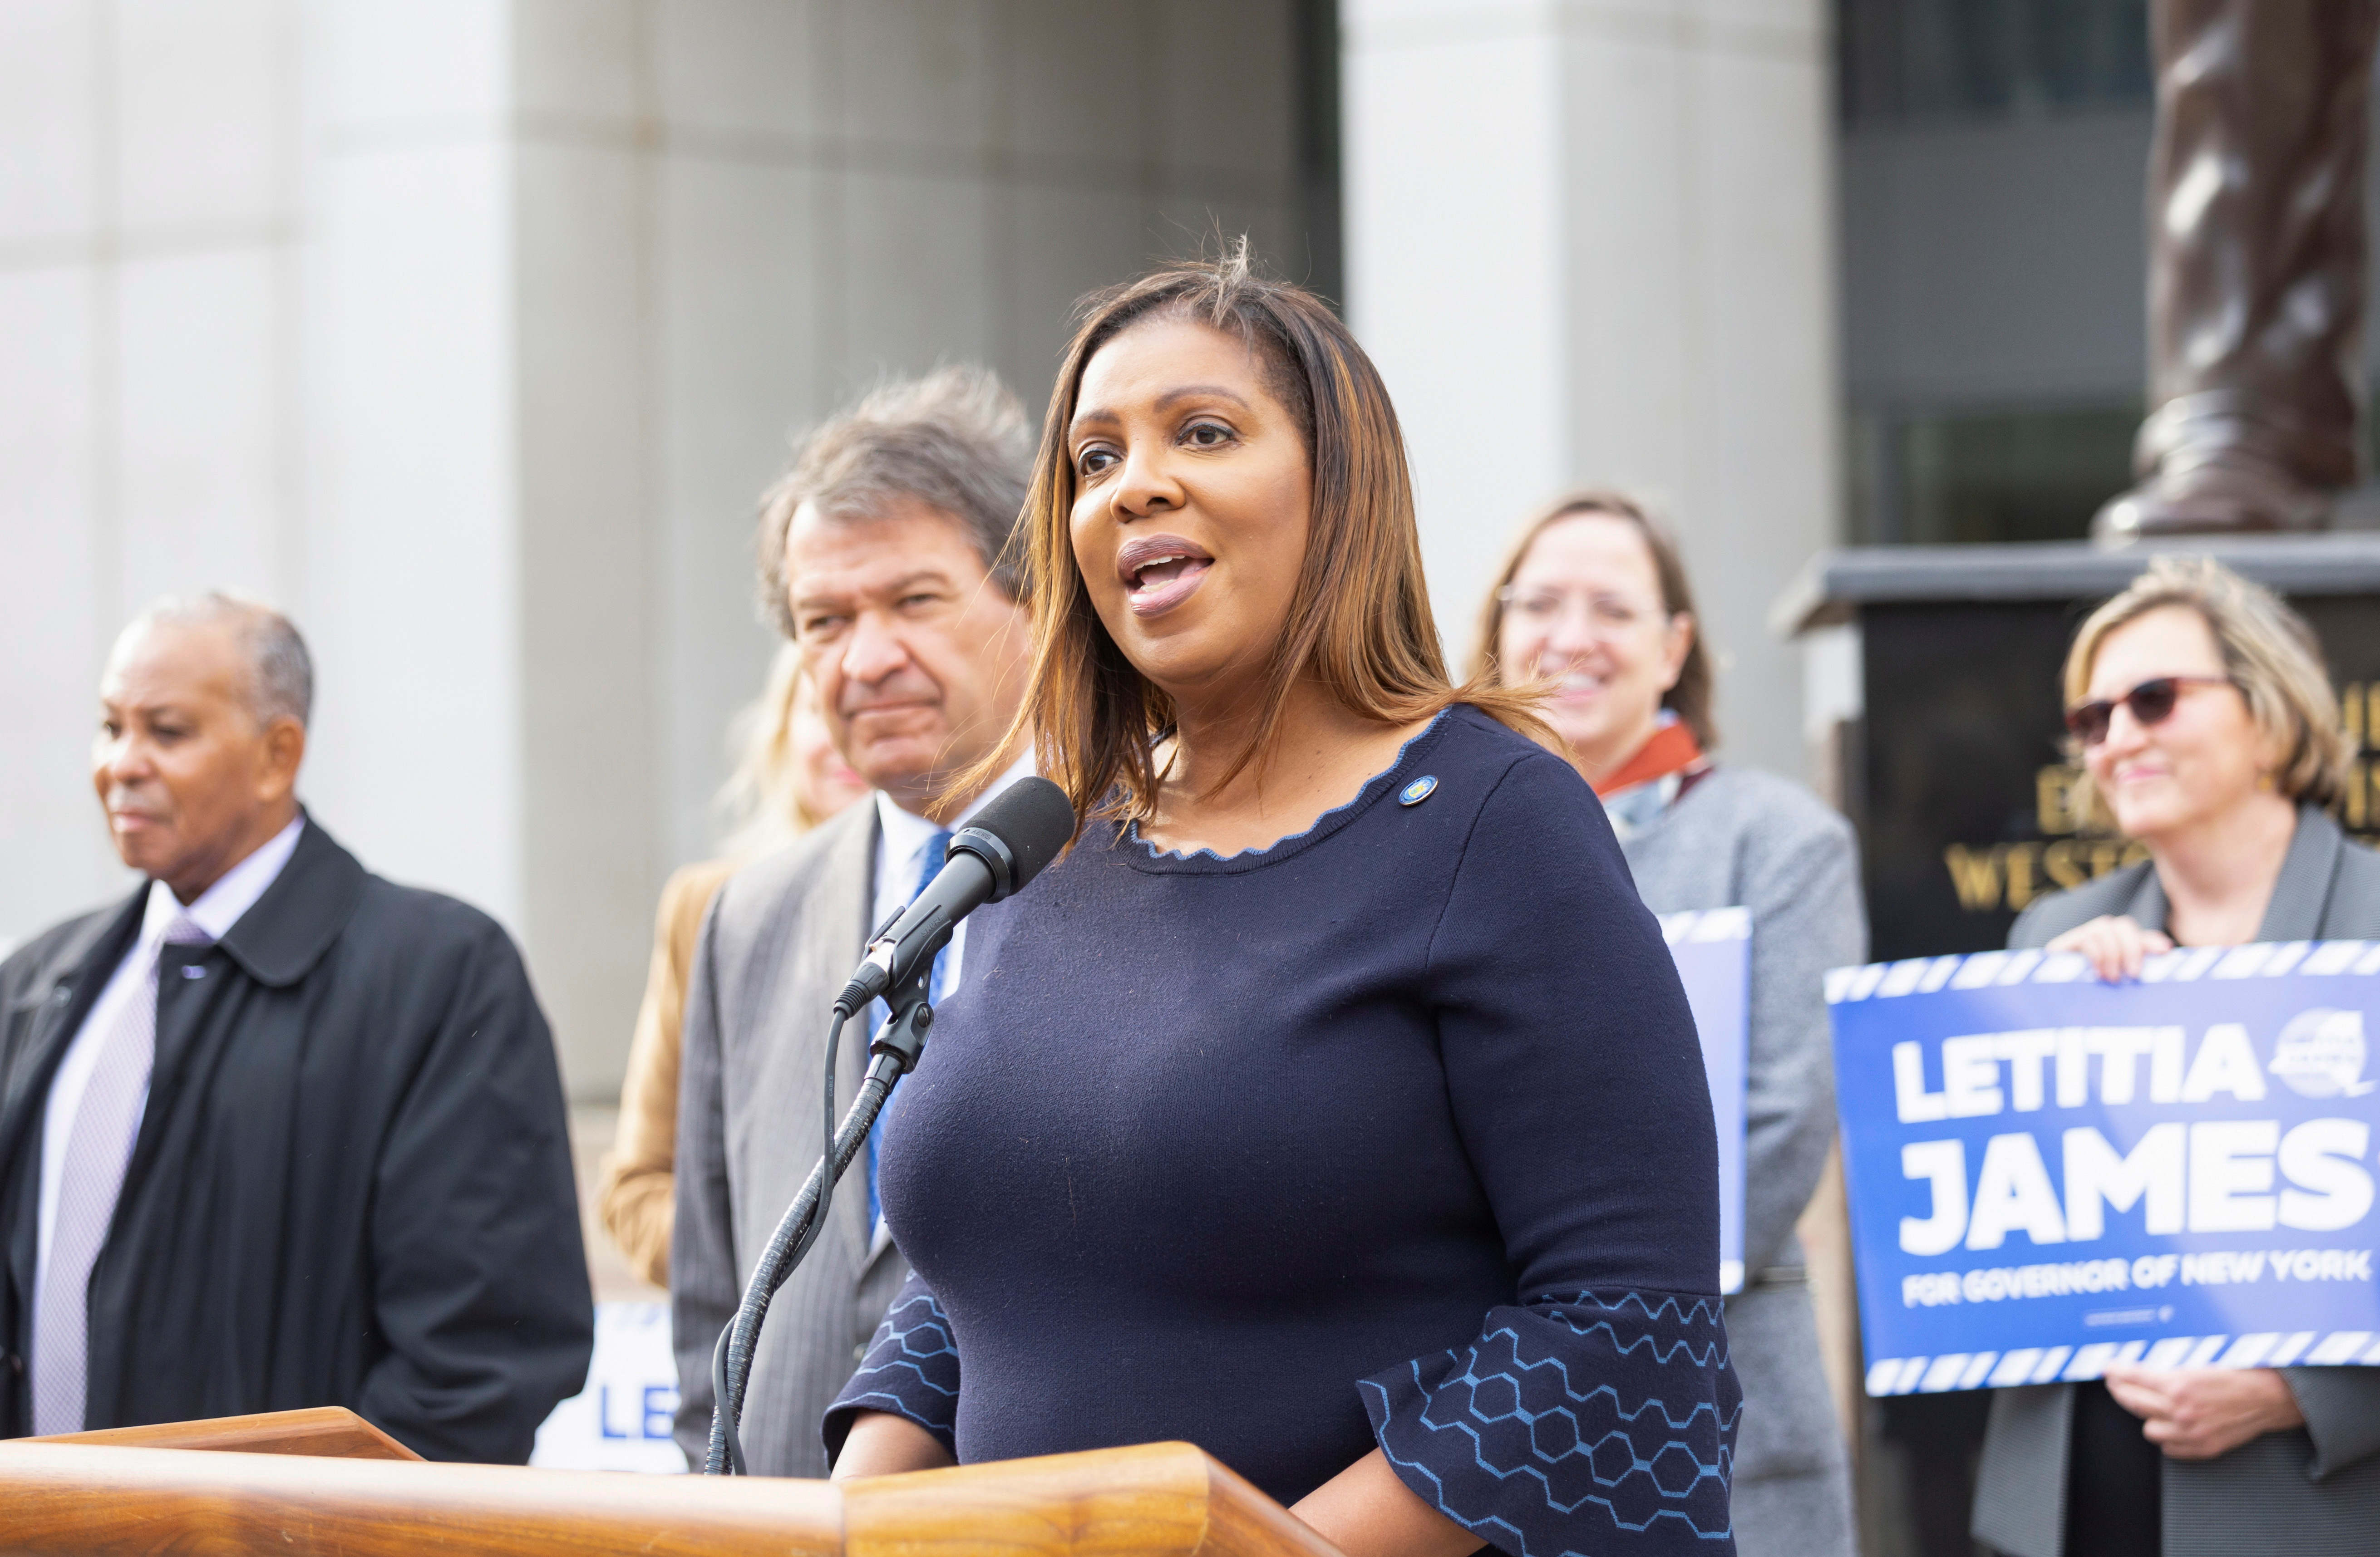 New York State Attorney General Letitia James speaks during an endorsement for governor event